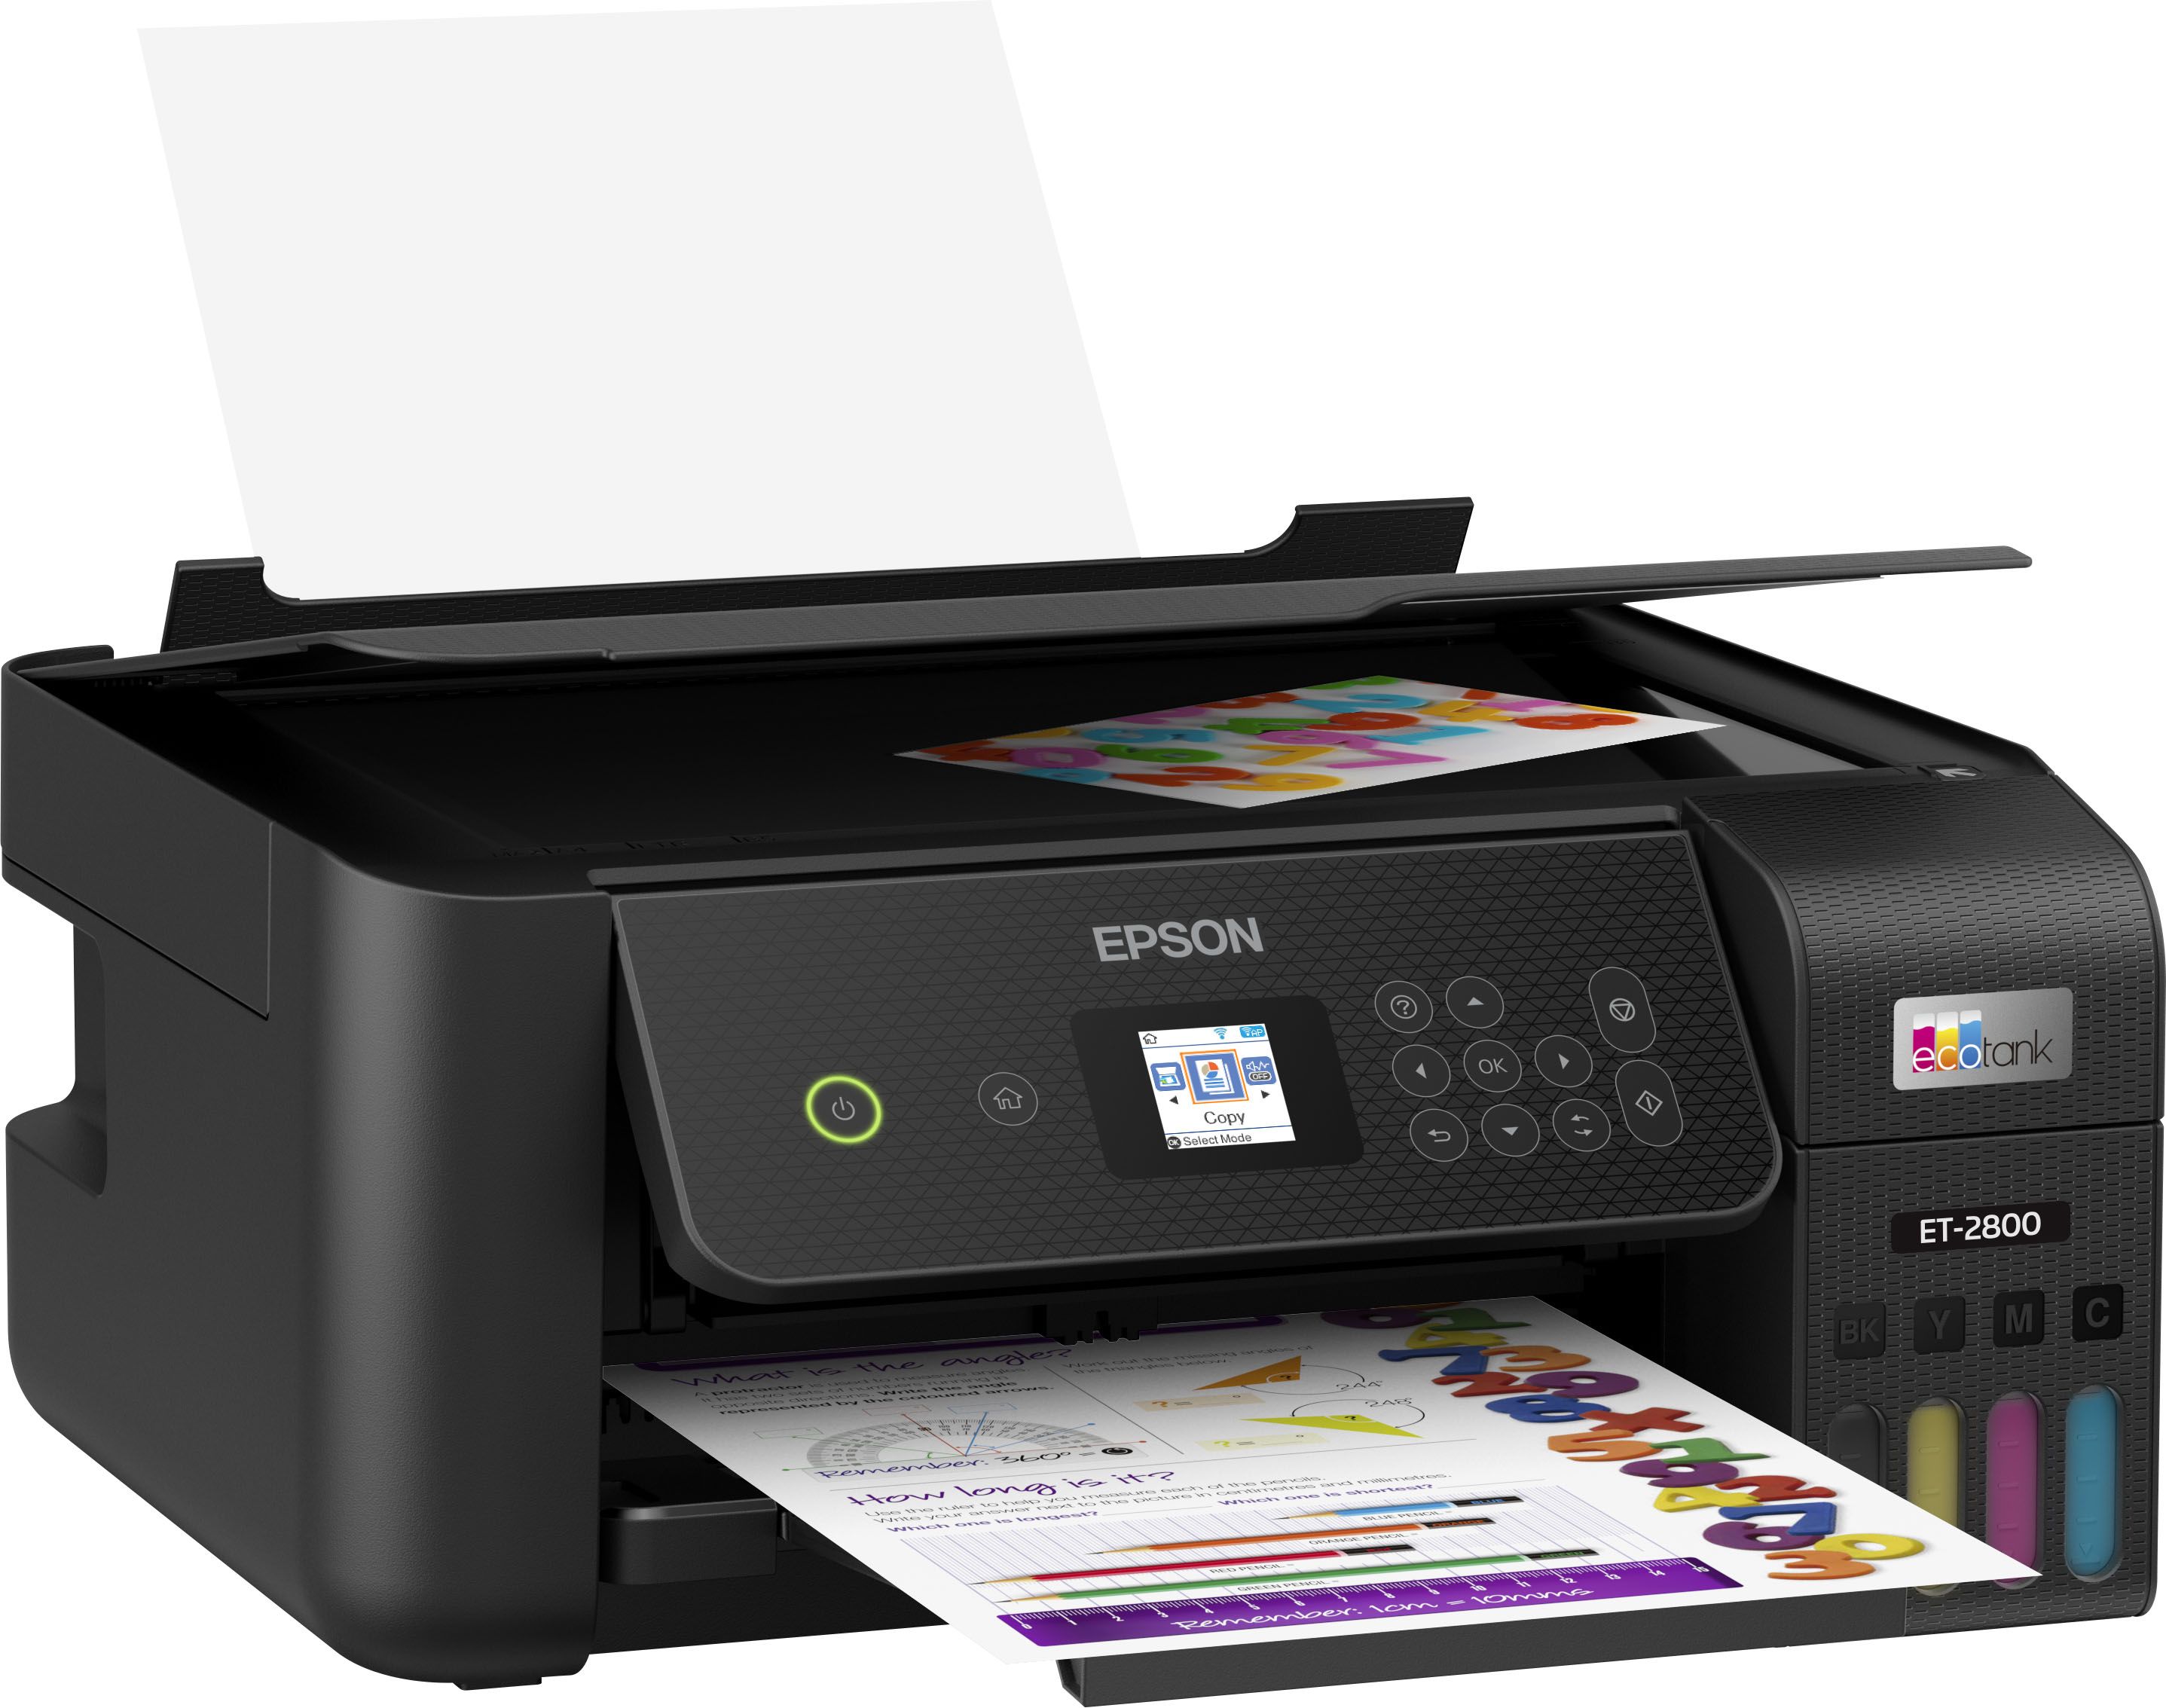 Angle View: Canon - 250/251 4-Pack Standard Capacity Ink Cartridges + Photo Paper - Black/Cyan/Magenta/Yellow